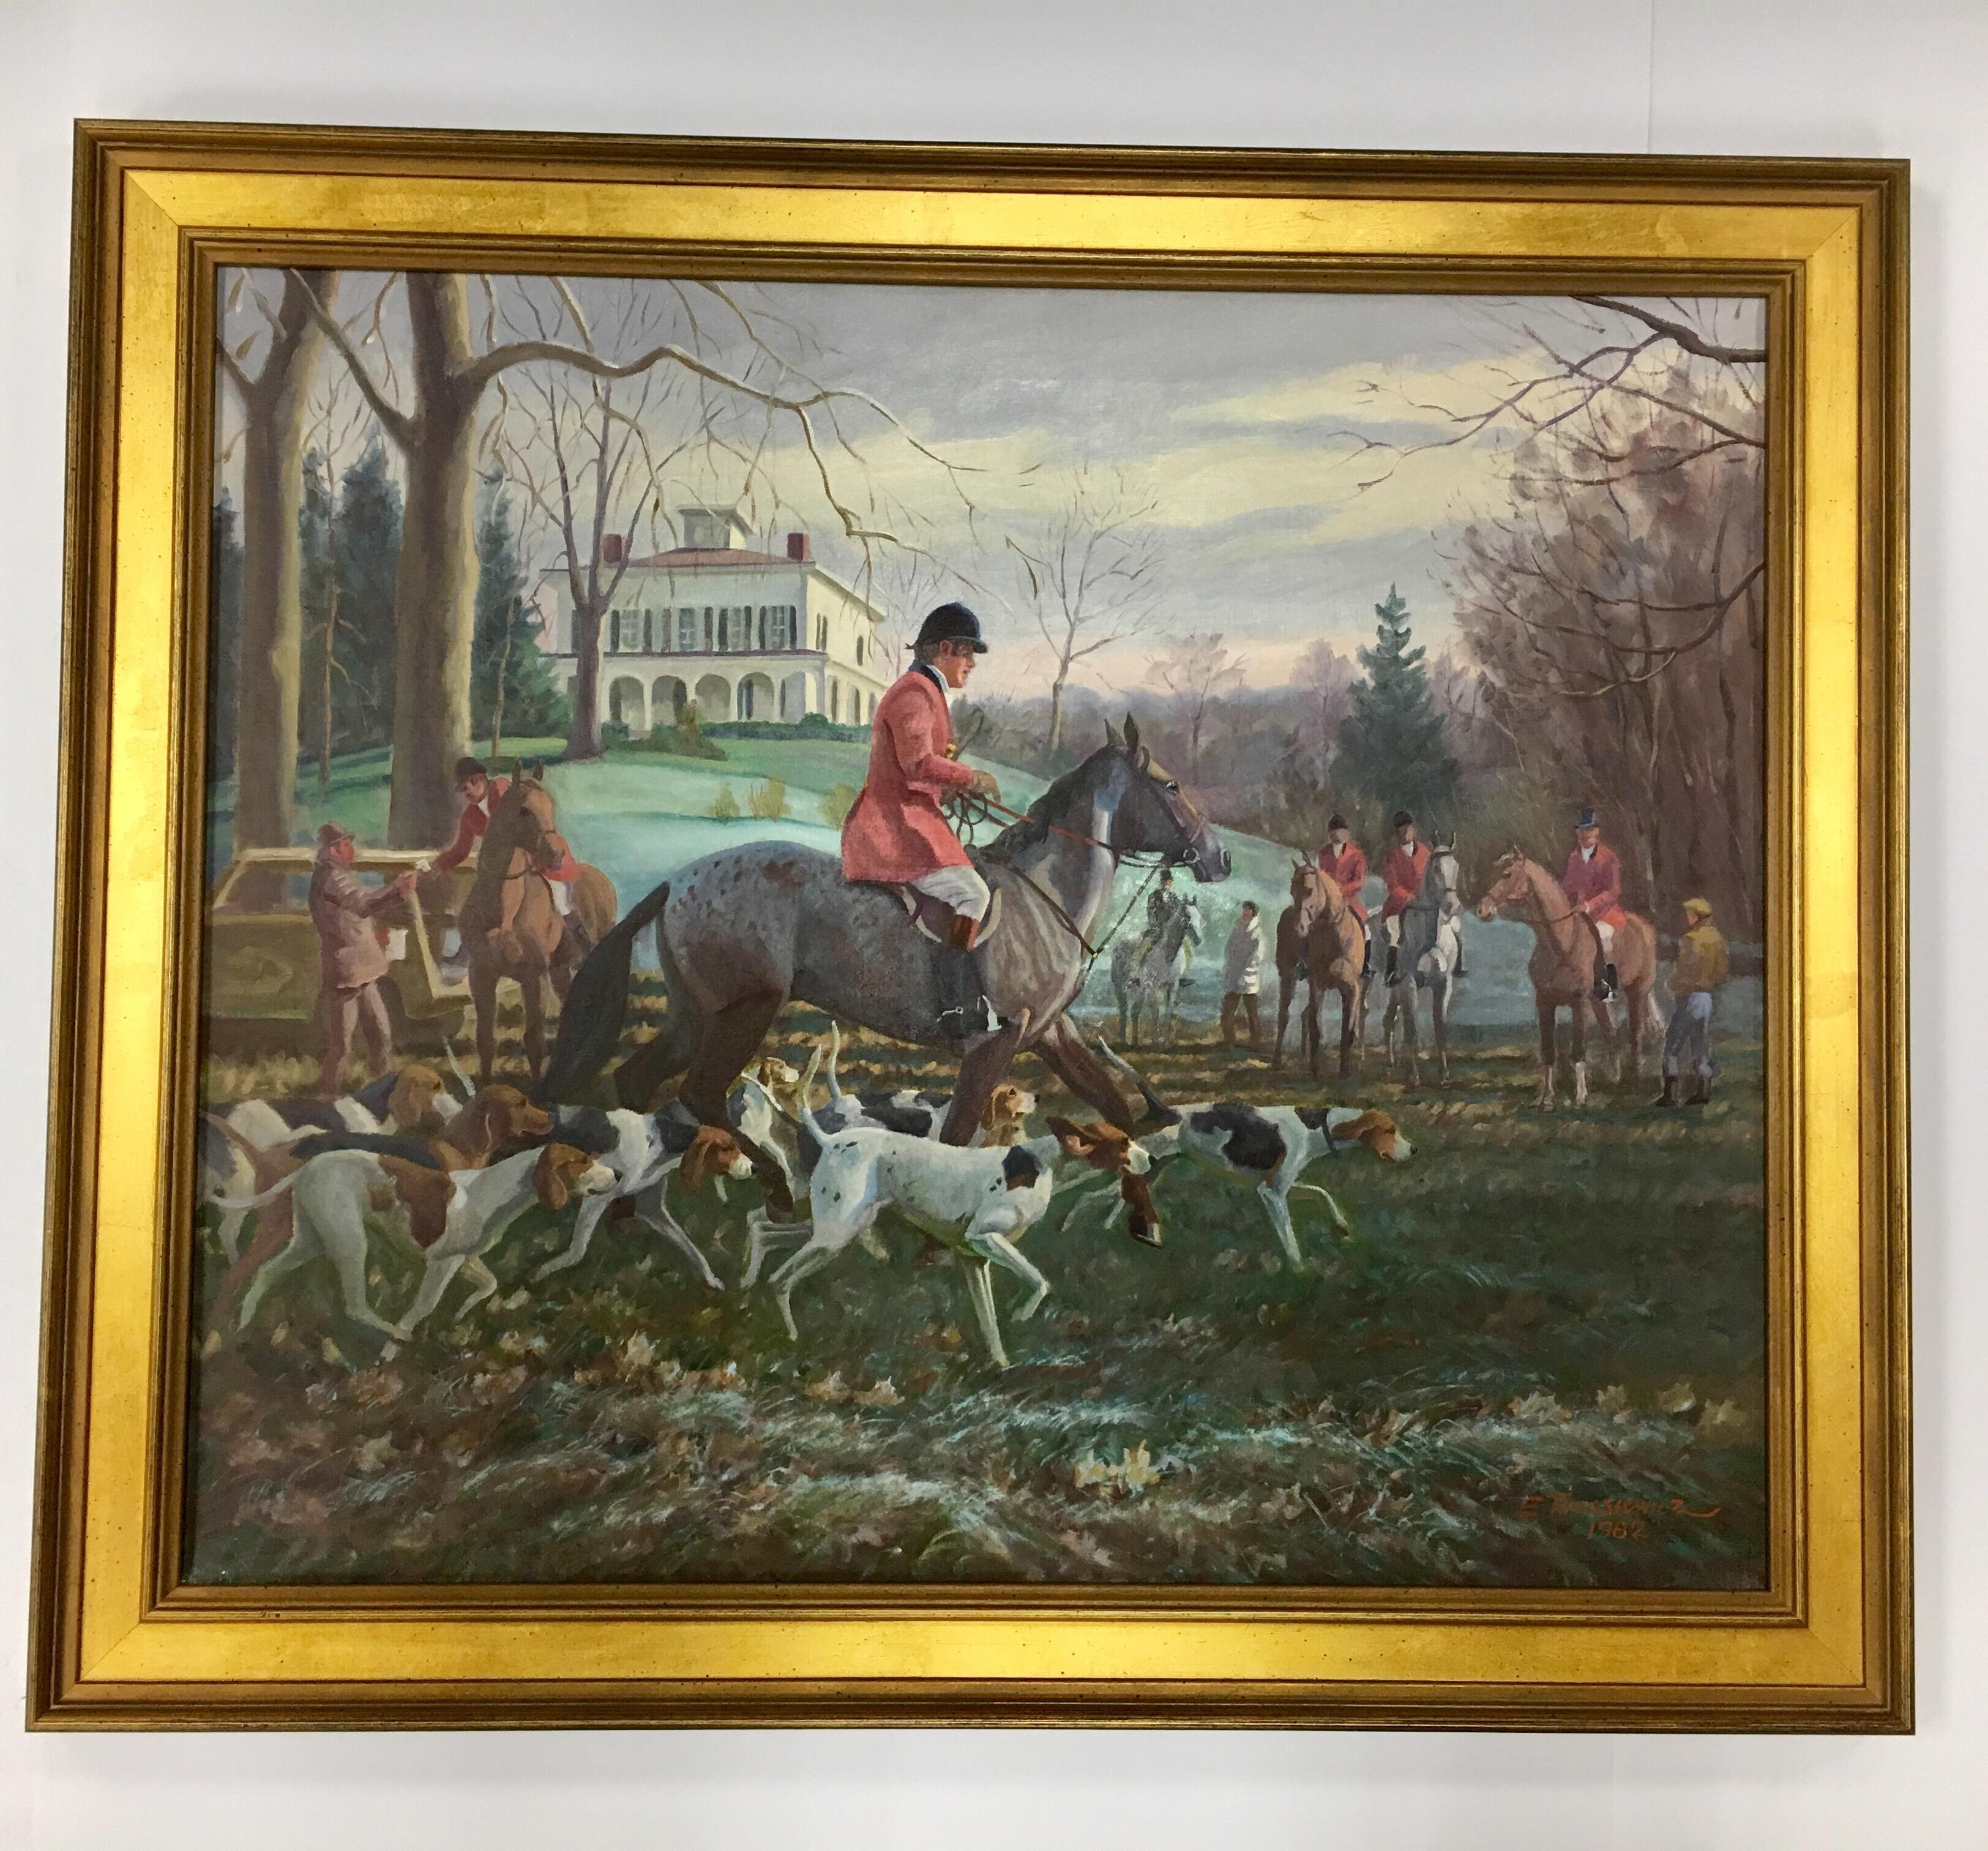 Stunning original Edward Tomasiewicz (1919-2006) oil painting depicting a hunt scene in the countryside. His work is featured in and around the northeast part of the United States. Medium is oil on canvas and frame is original. This is the last of